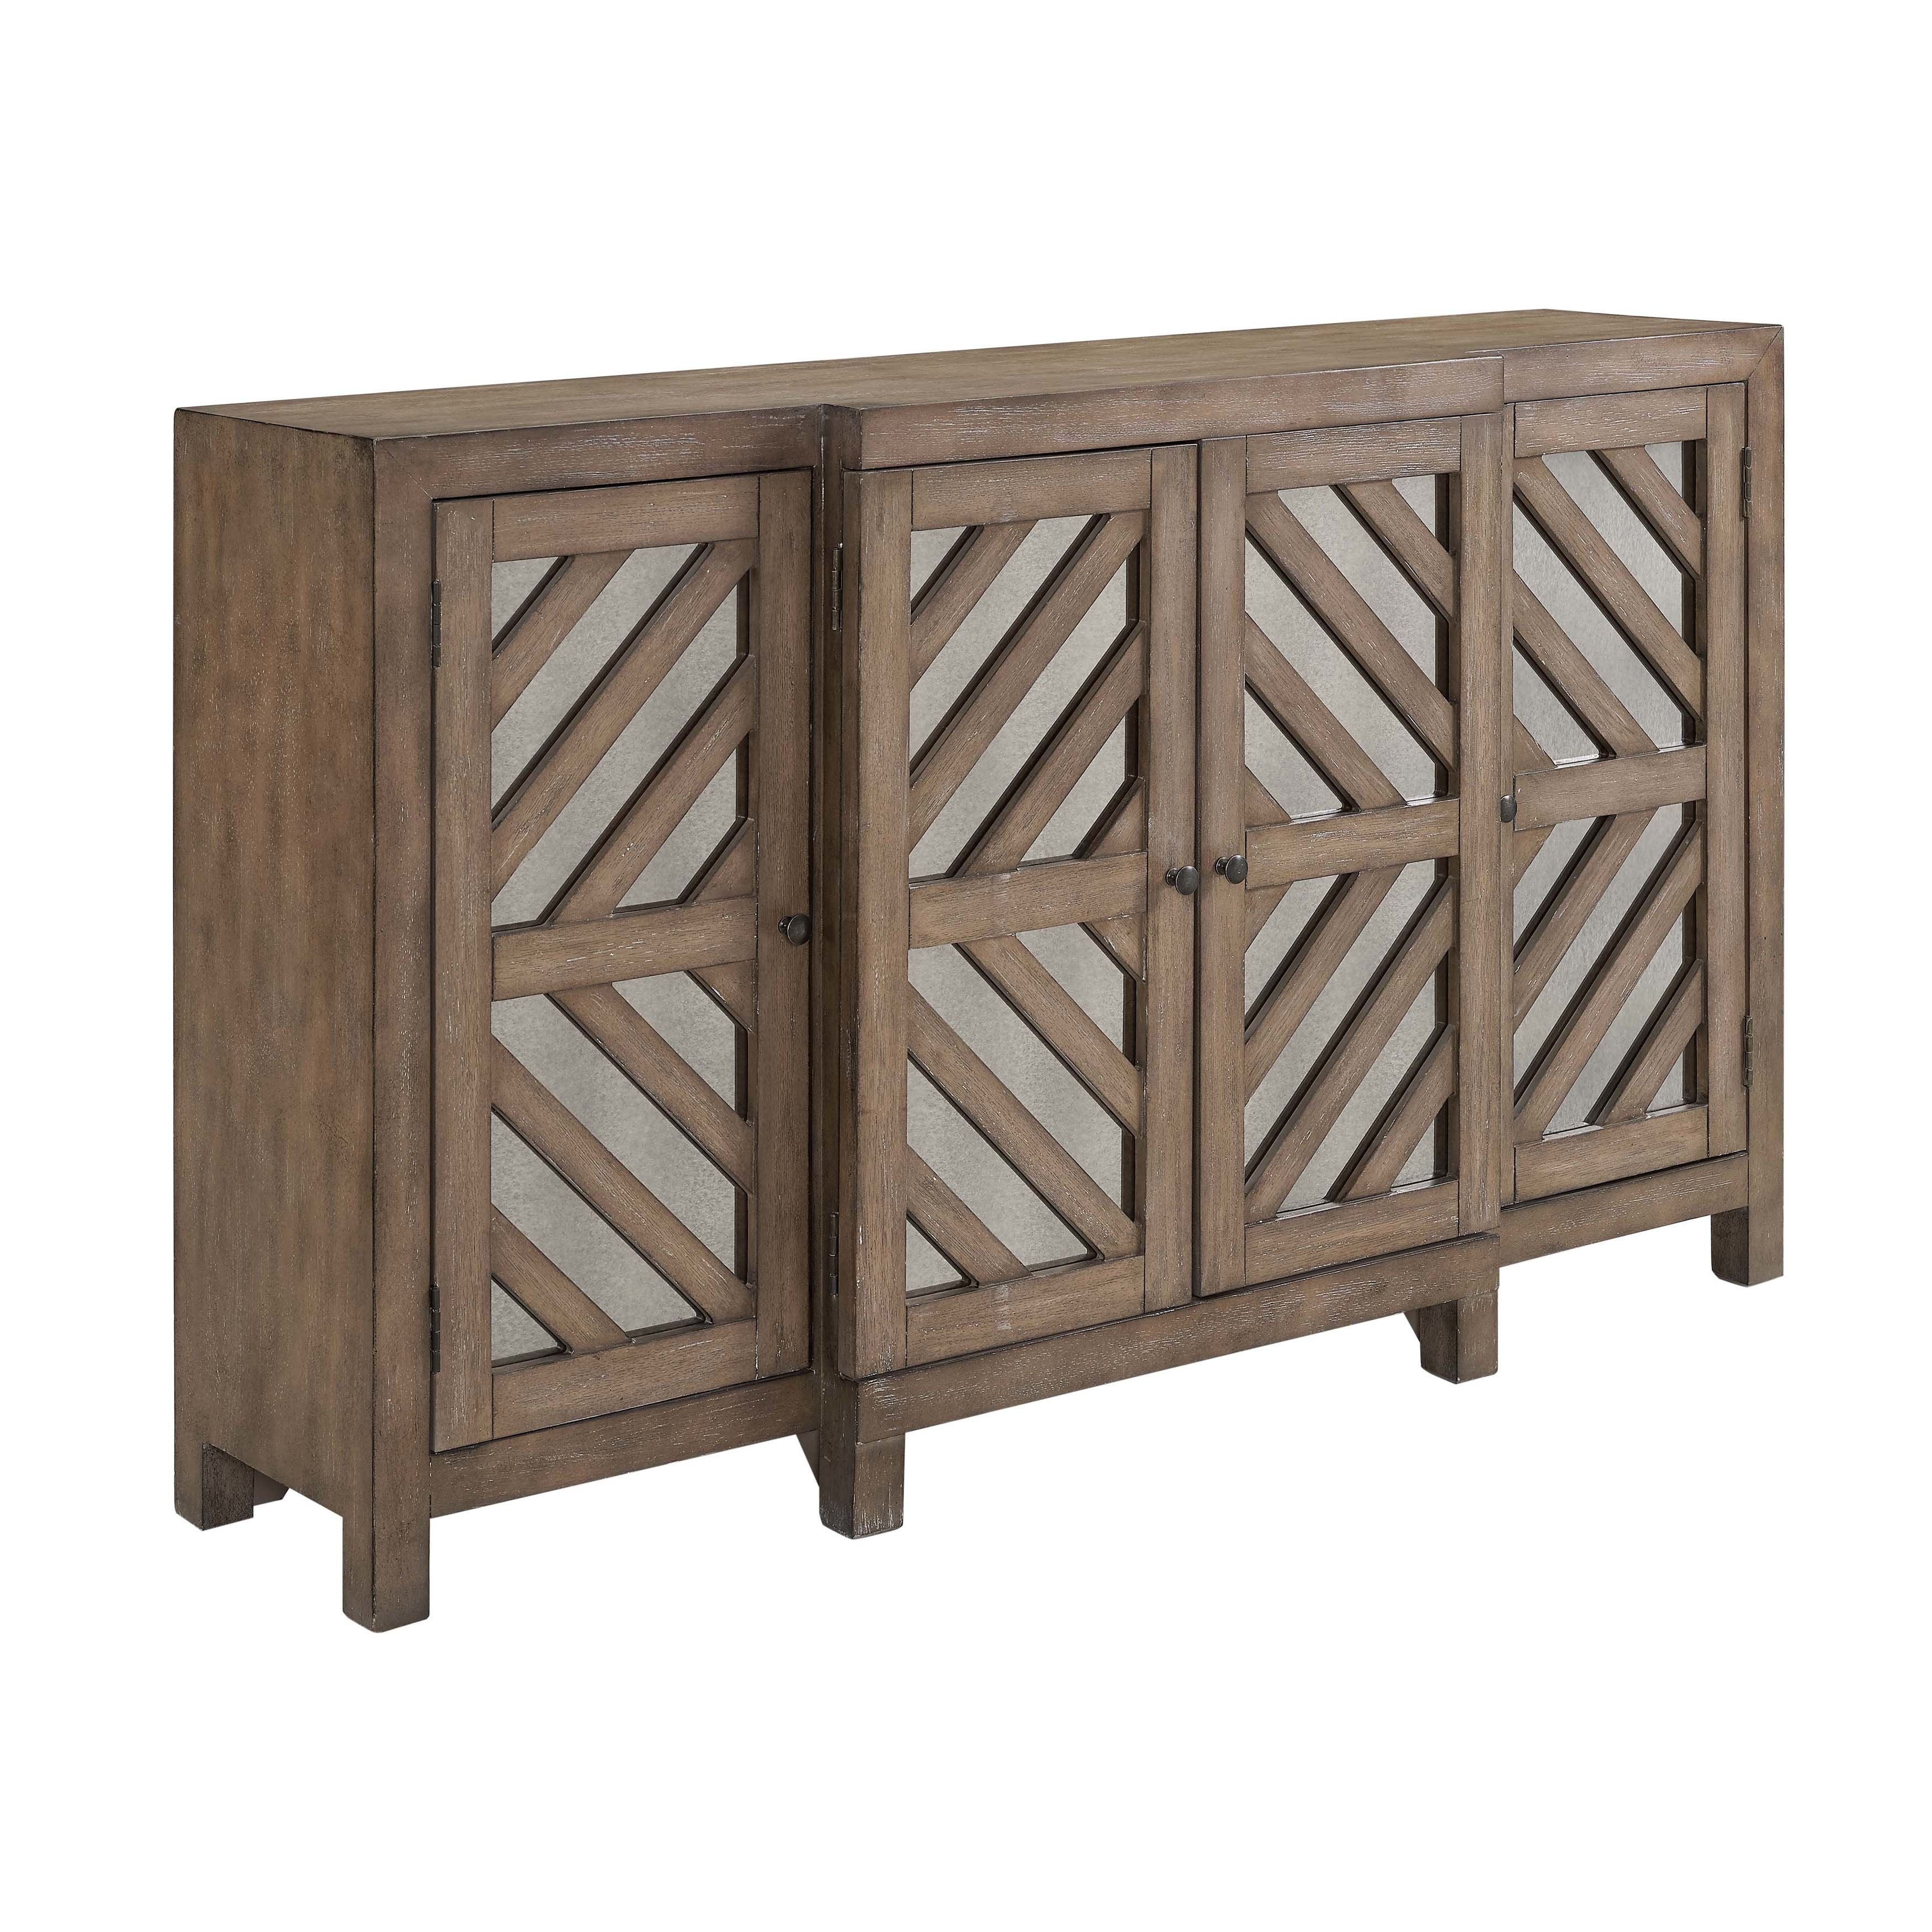 Modern & Contemporary Deny Credenza | Allmodern With Geometric Shapes Credenzas (View 9 of 30)